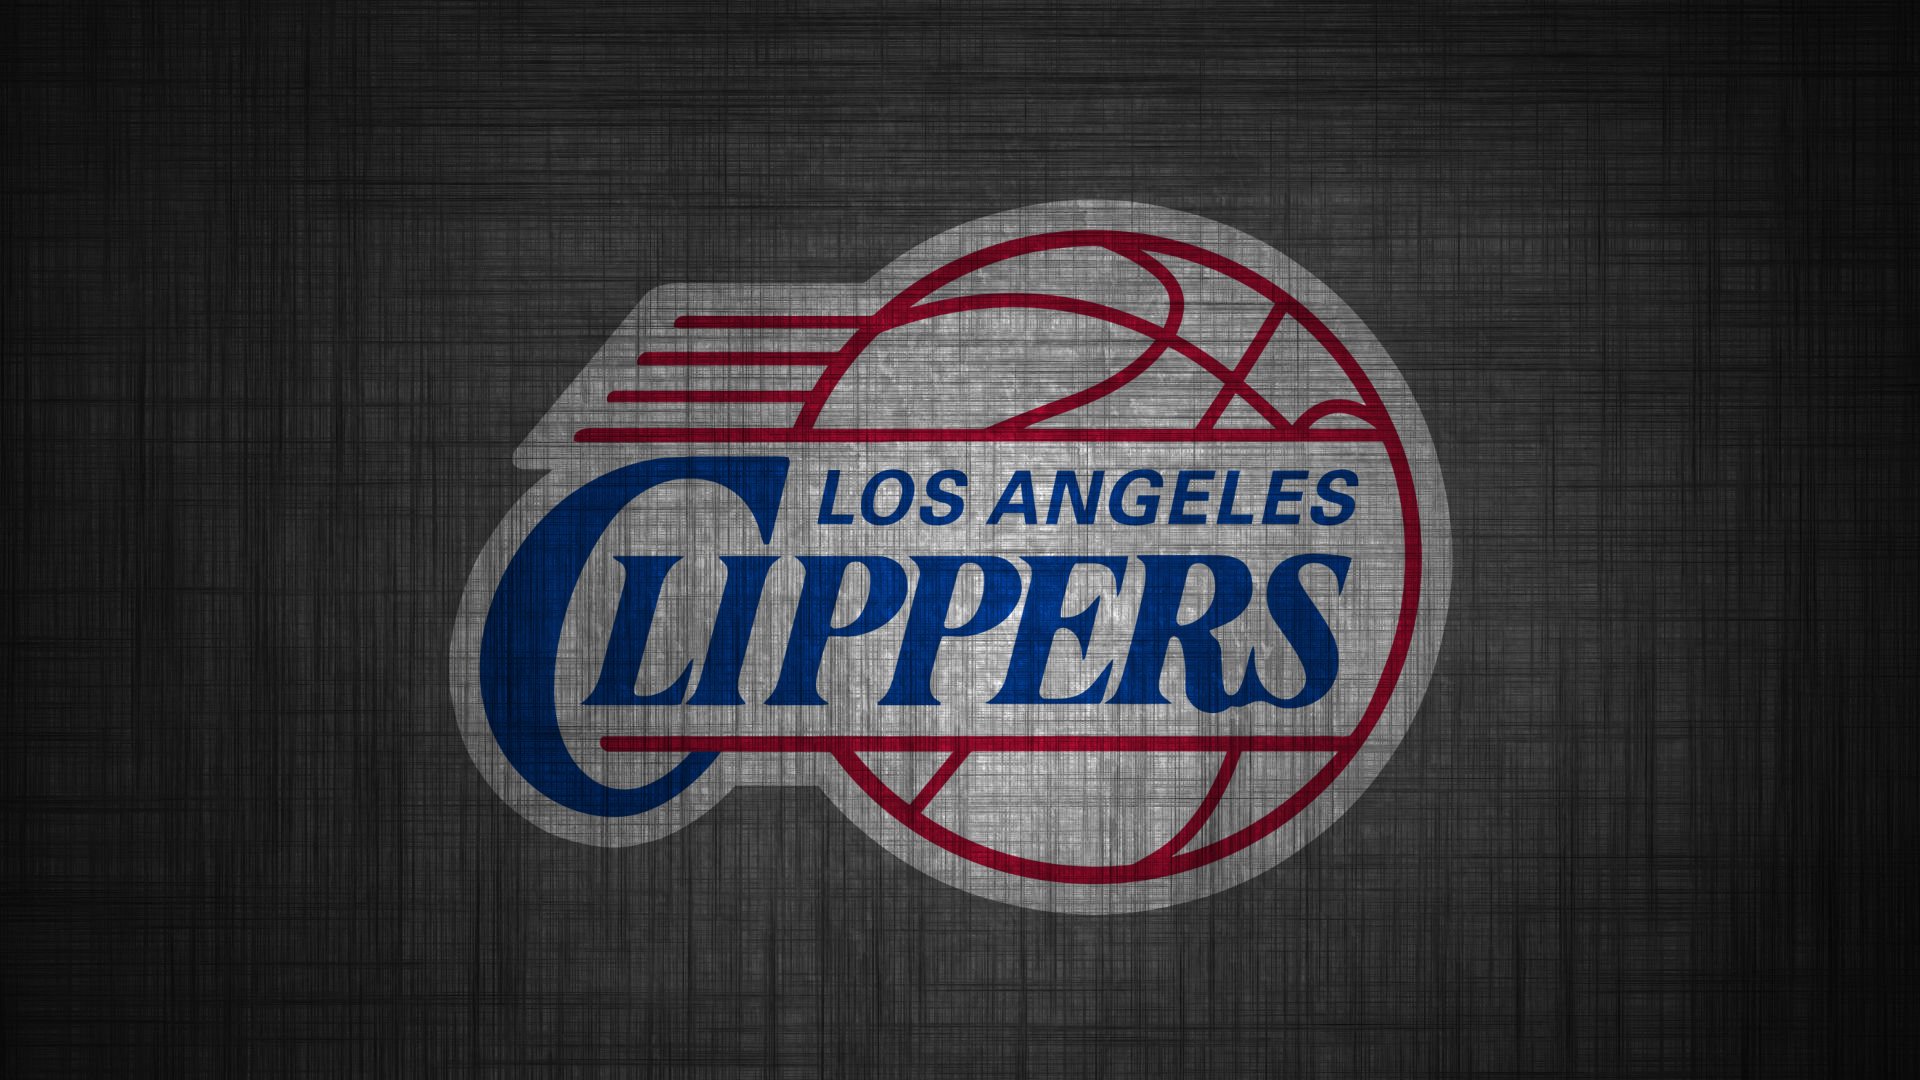 Los Angeles Clippers phone wallpaper 1080P 2k 4k Full HD Wallpapers  Backgrounds Free Download  Wallpaper Crafter